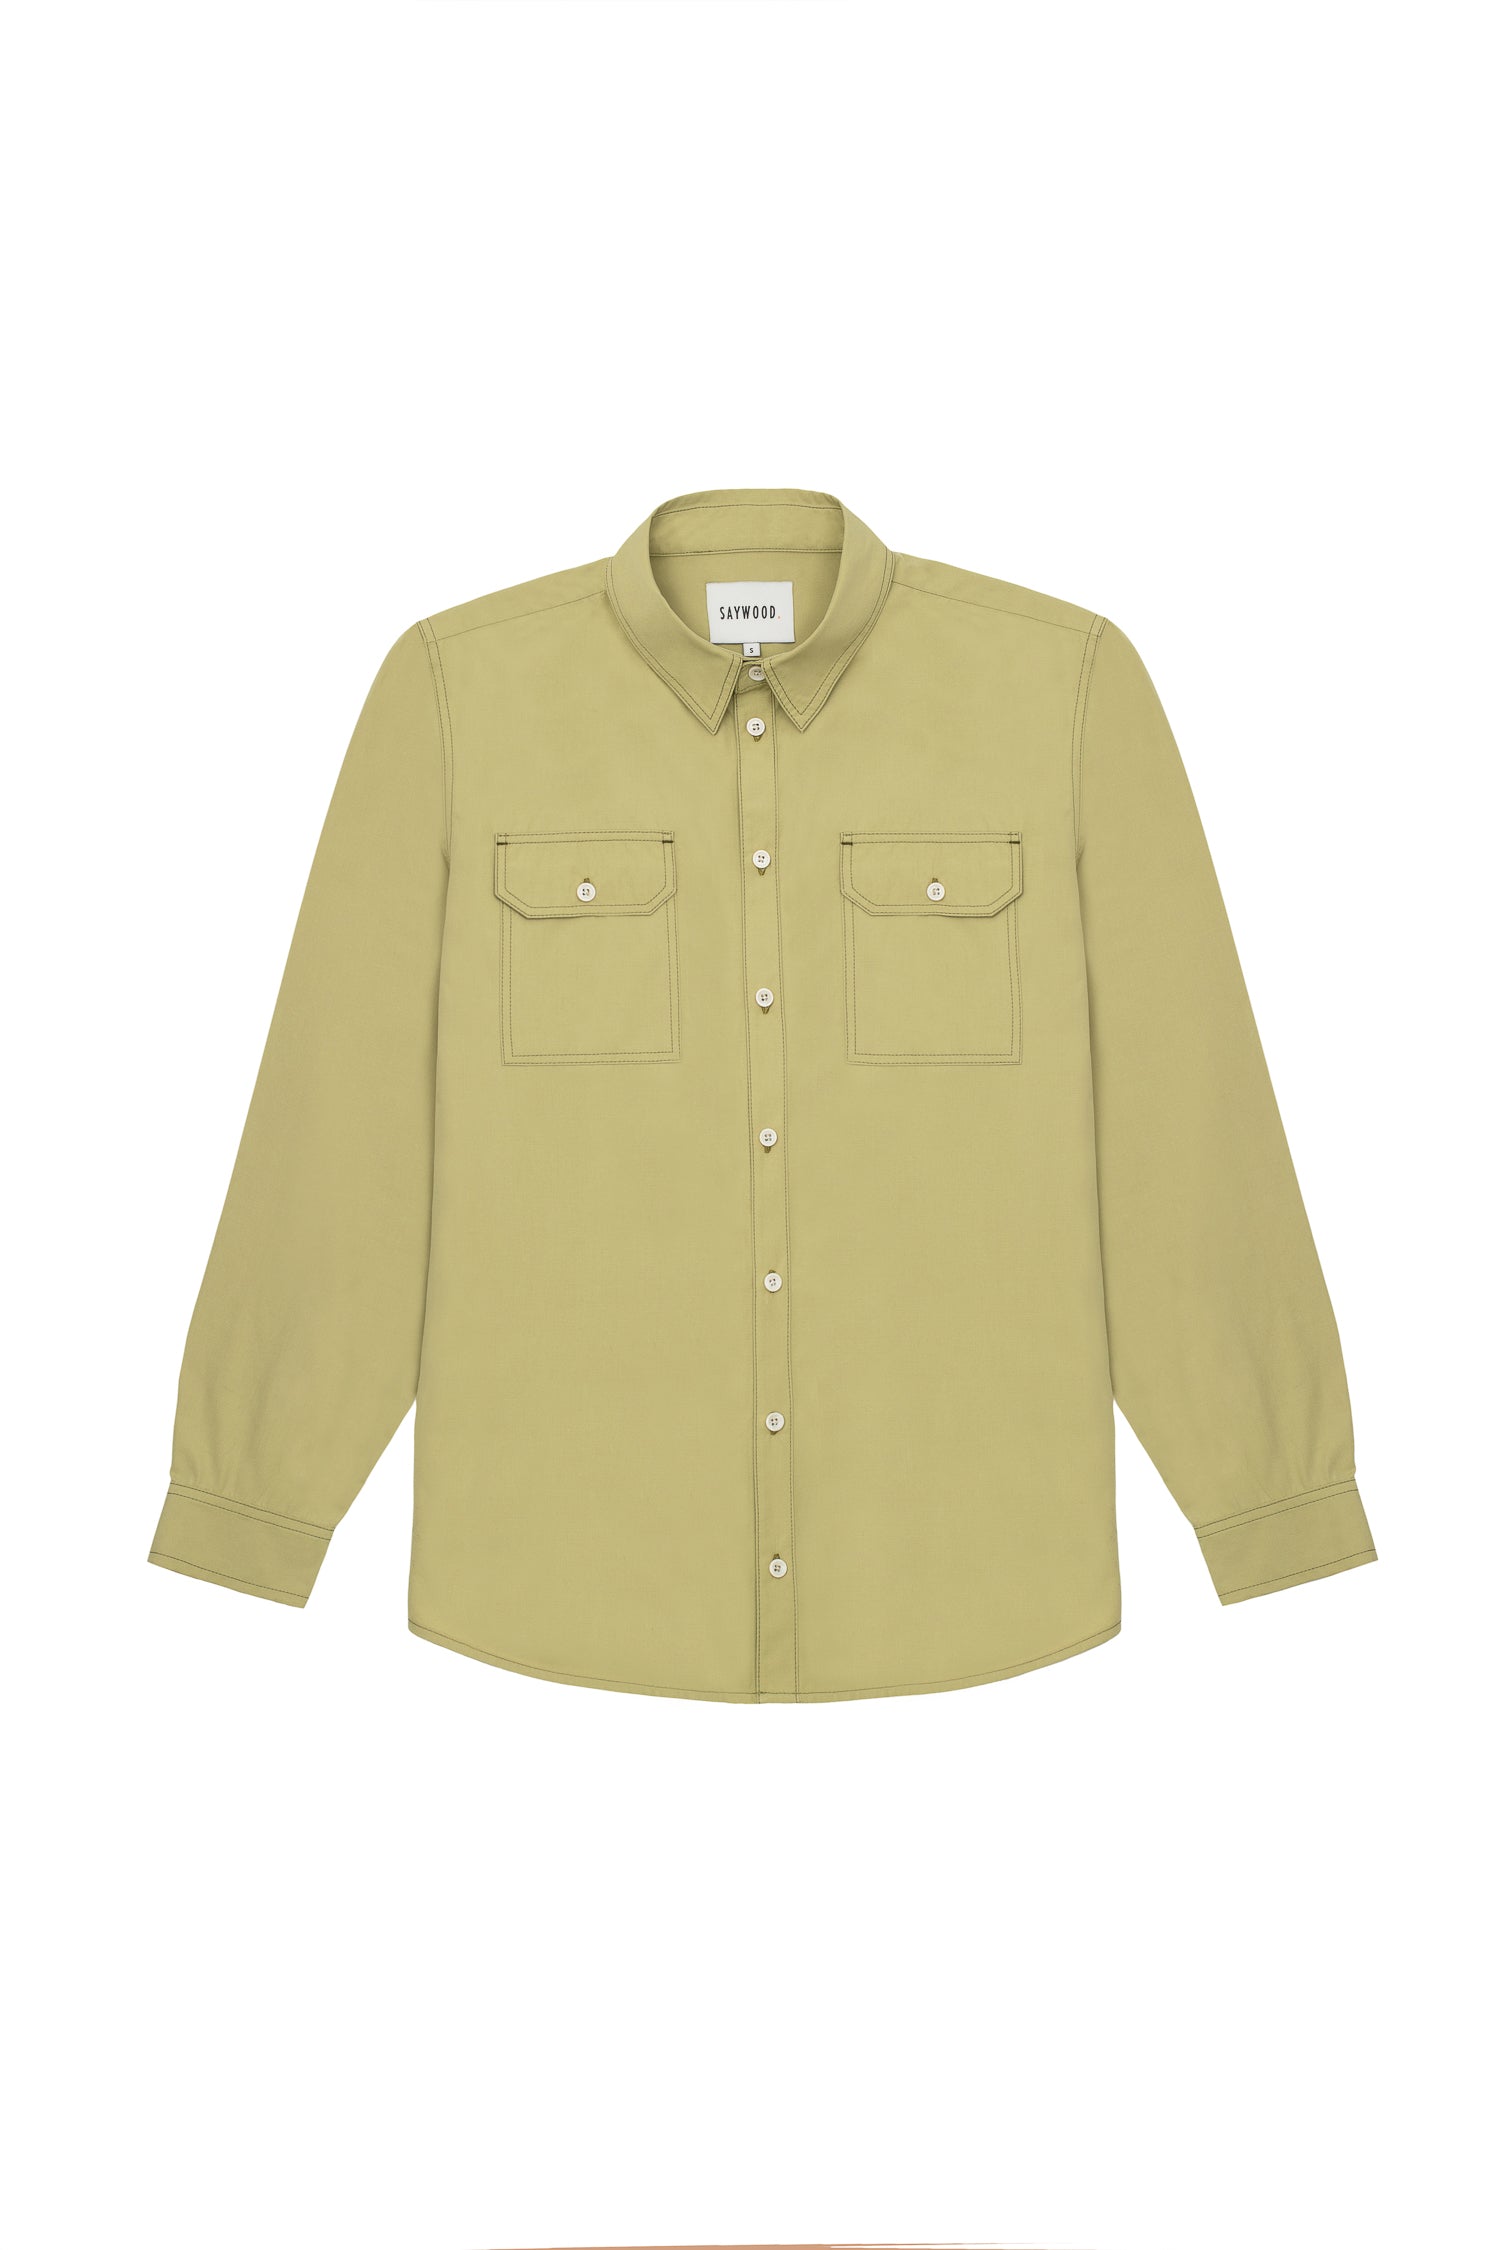 Mens Utility Shirt in olive khaki cotton. utility Patch Pocket details; the Eddy Shirt regular fit by Saywood